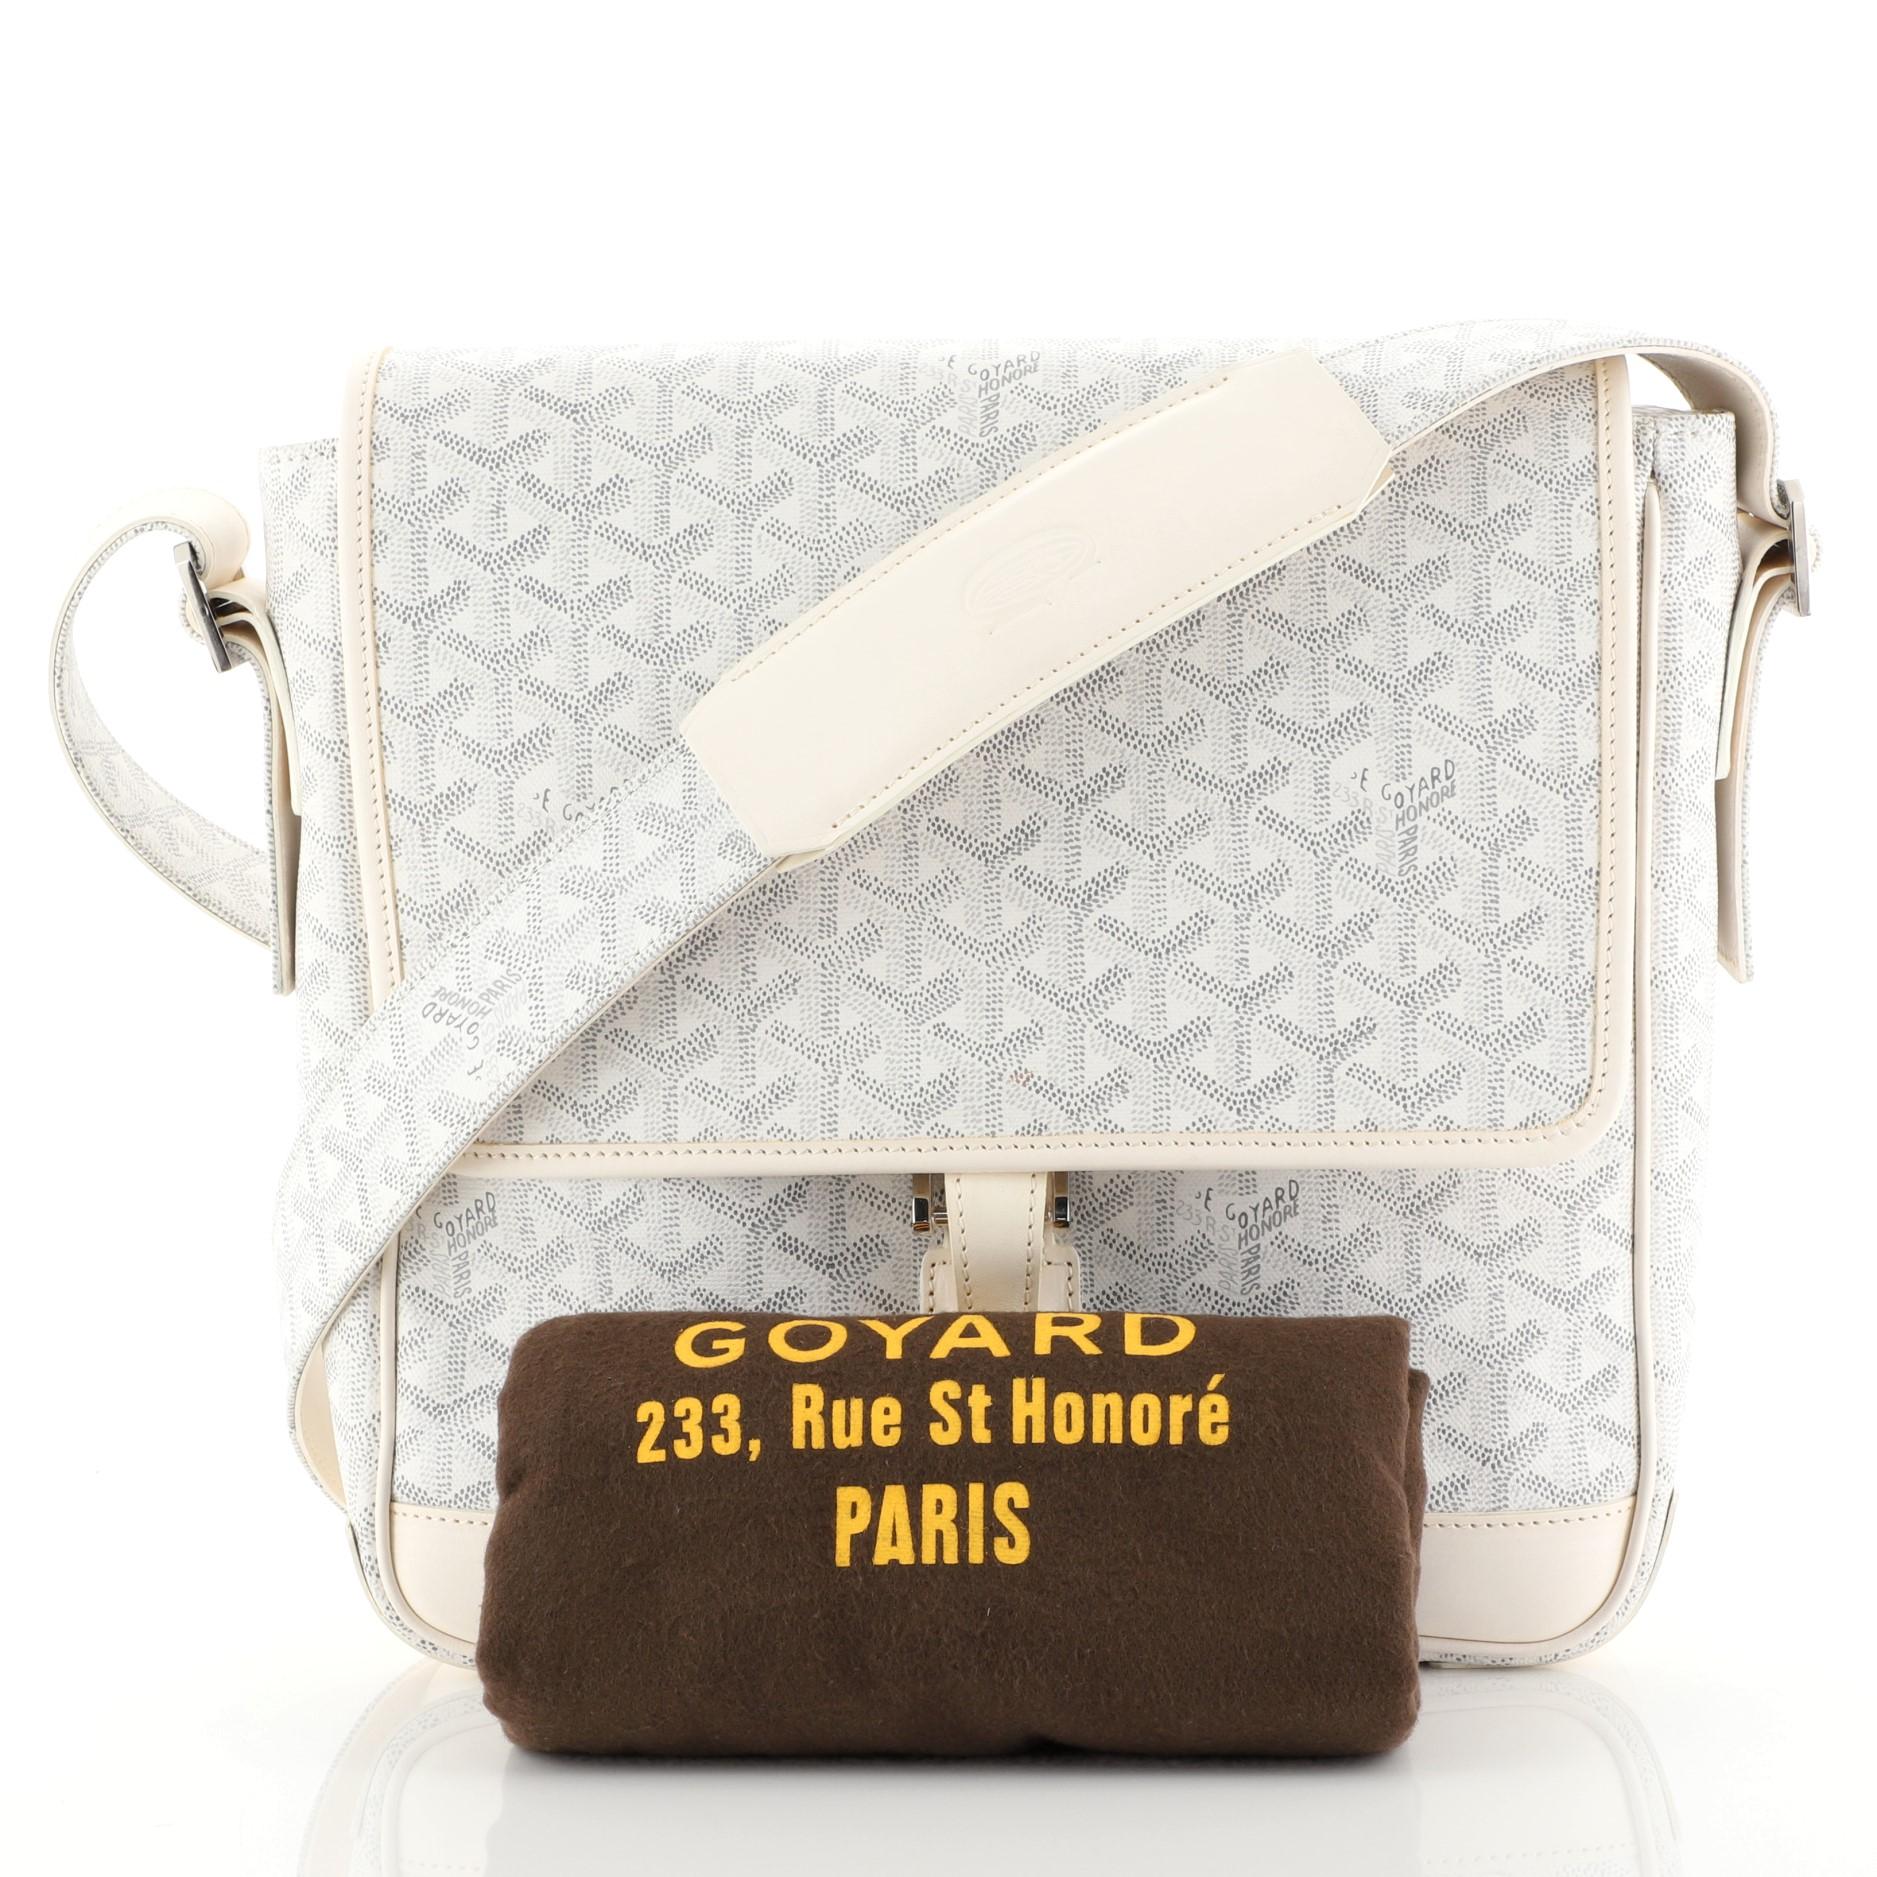 This Goyard Urbain Messenger Bag Coated Canvas, crafted in white coated canvas, features an adjustable shoulder strap, leather trim and silver-tone hardware. Its buckle closure opens to a yellow fabric interior with slip pockets. 

Estimated Retail